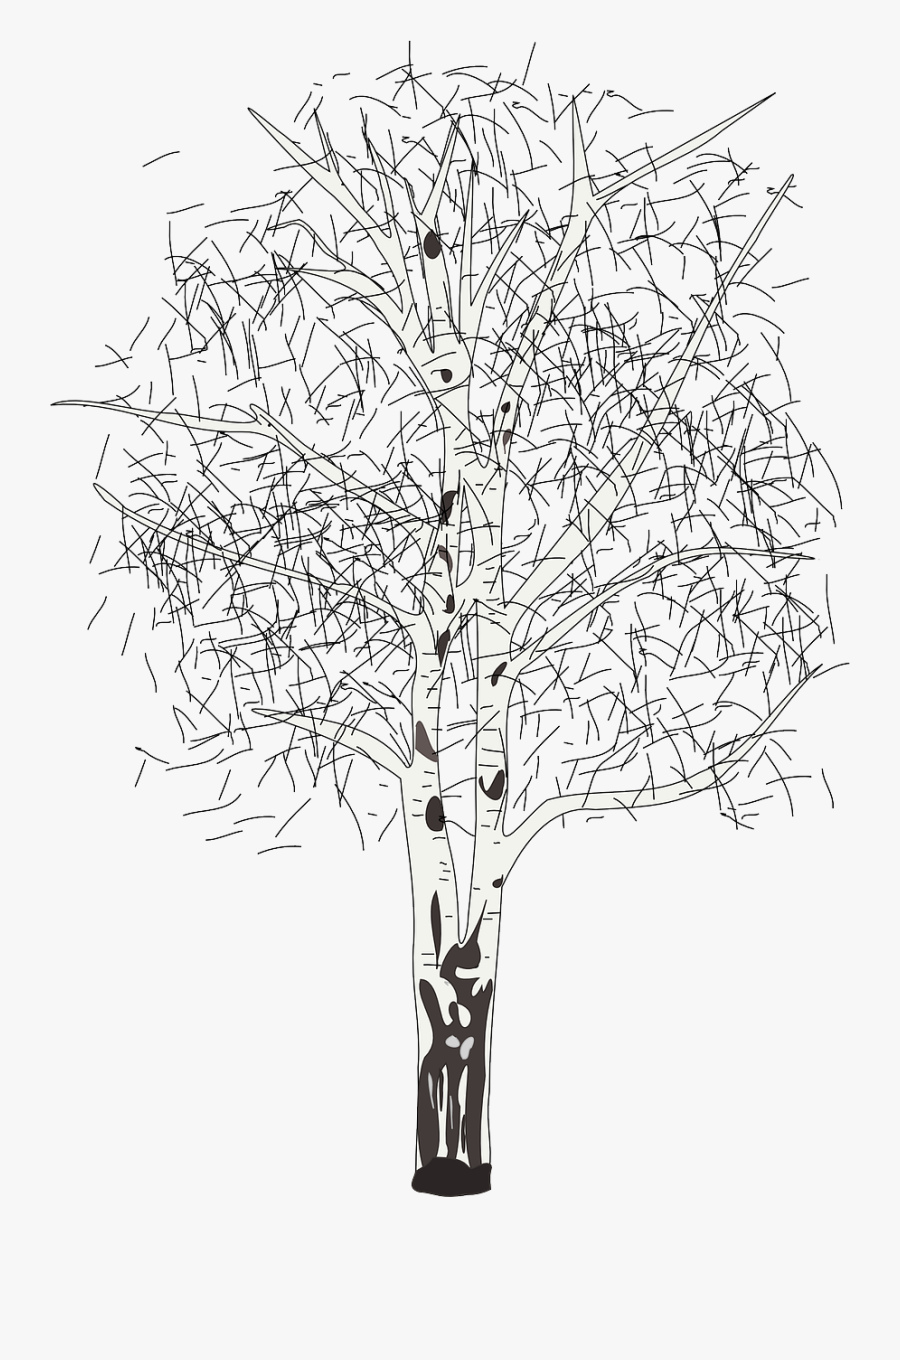 Transparent Wood Clipart Black And White - Silver Birch Tree Clipart, Transparent Clipart